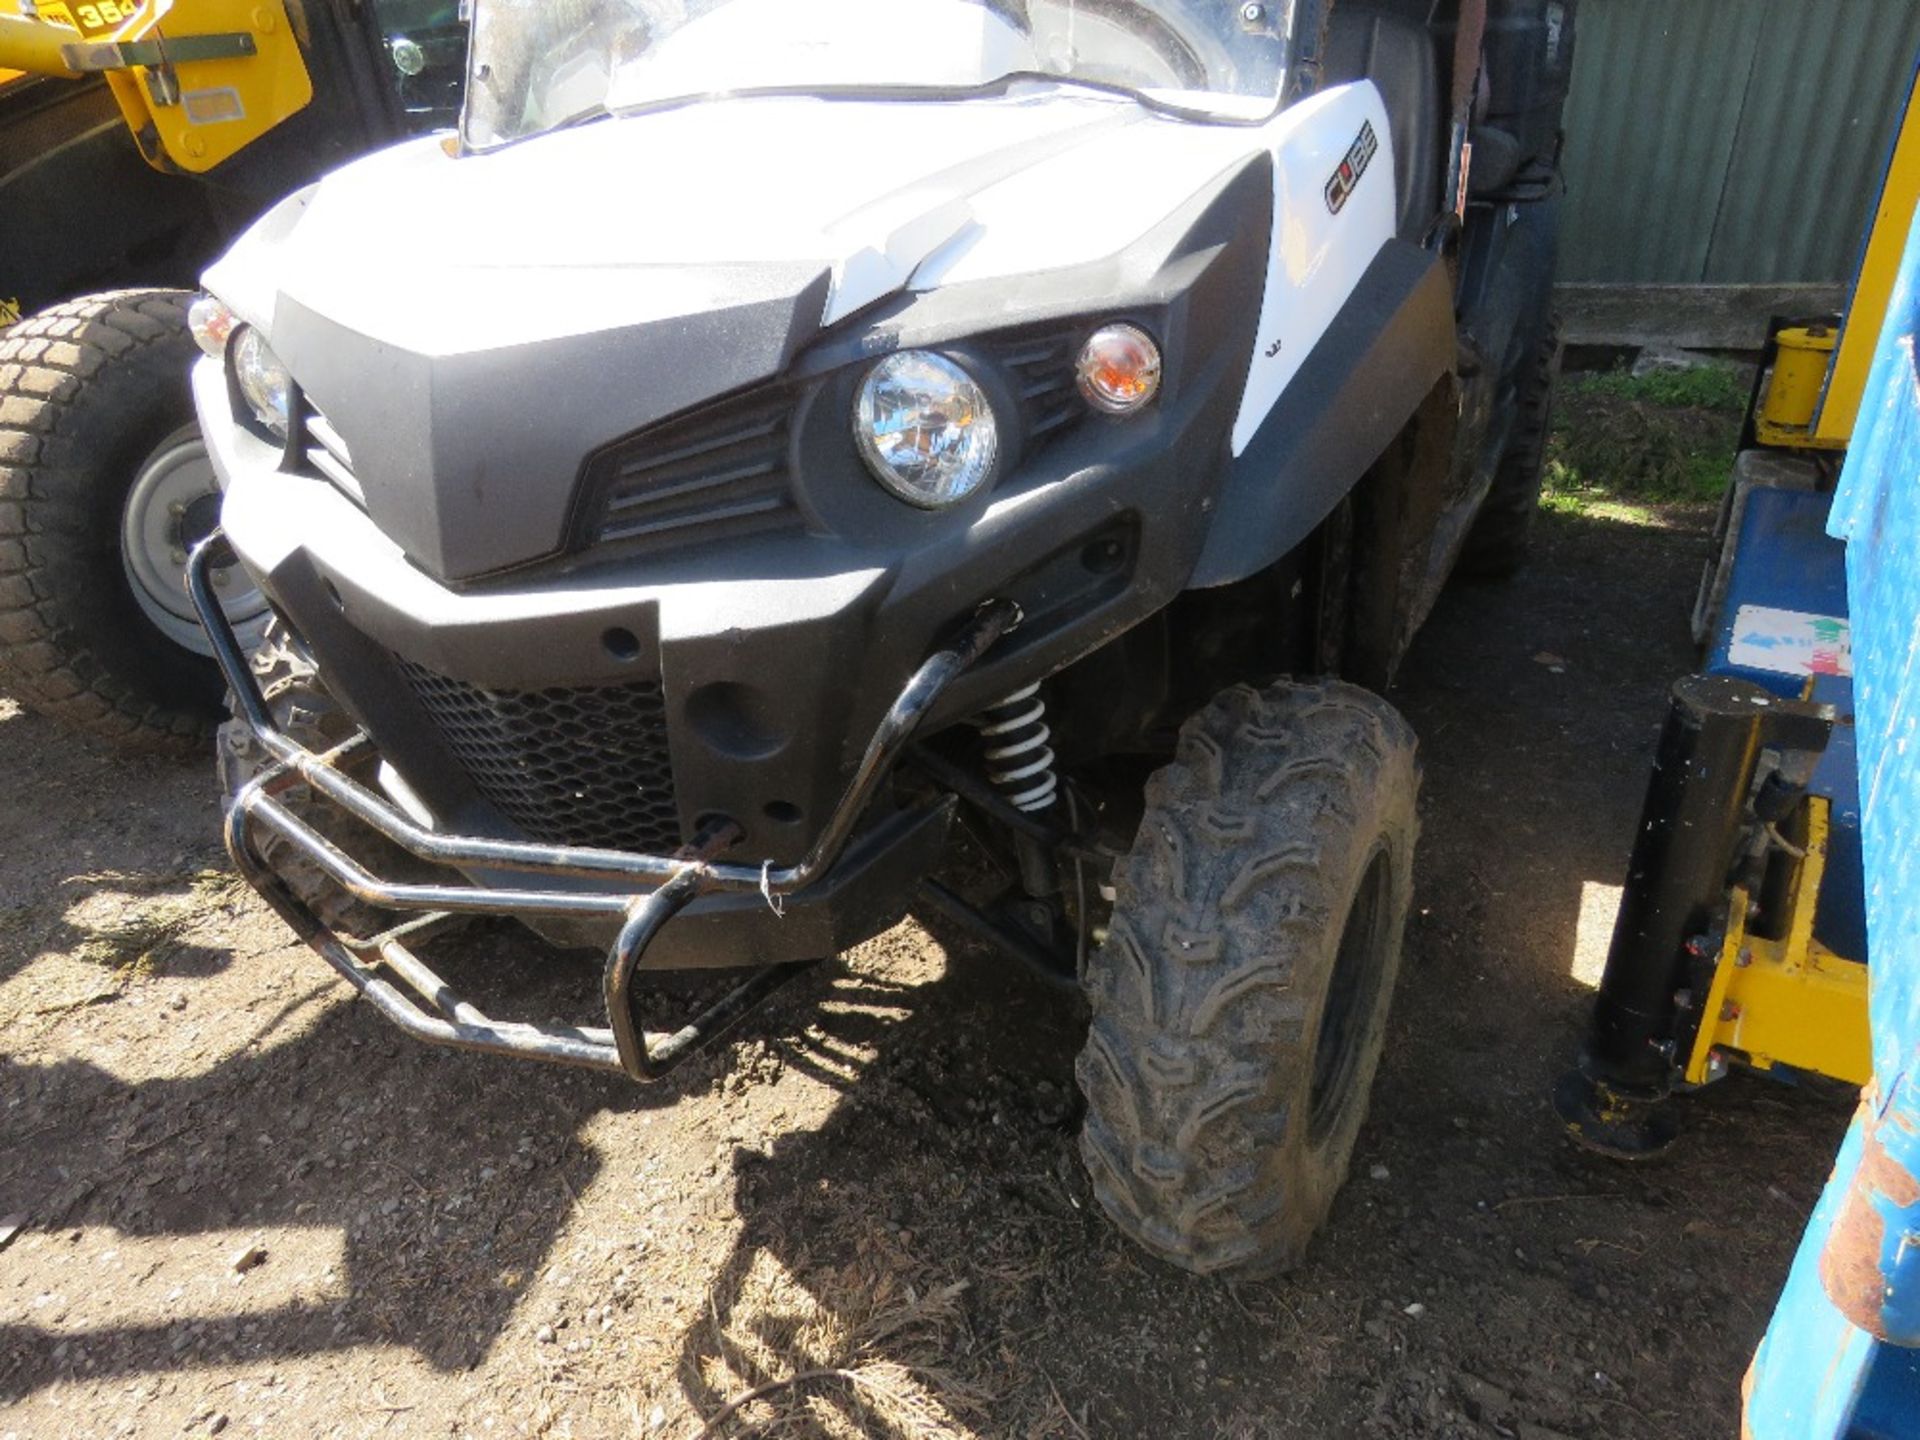 AEON CUBE PETROL ENGINED UTILITY VEHICLE WITH REAR BUCK. ON THE SAME SMALLHOLDING FROM NEW. WHEN TES - Image 6 of 13